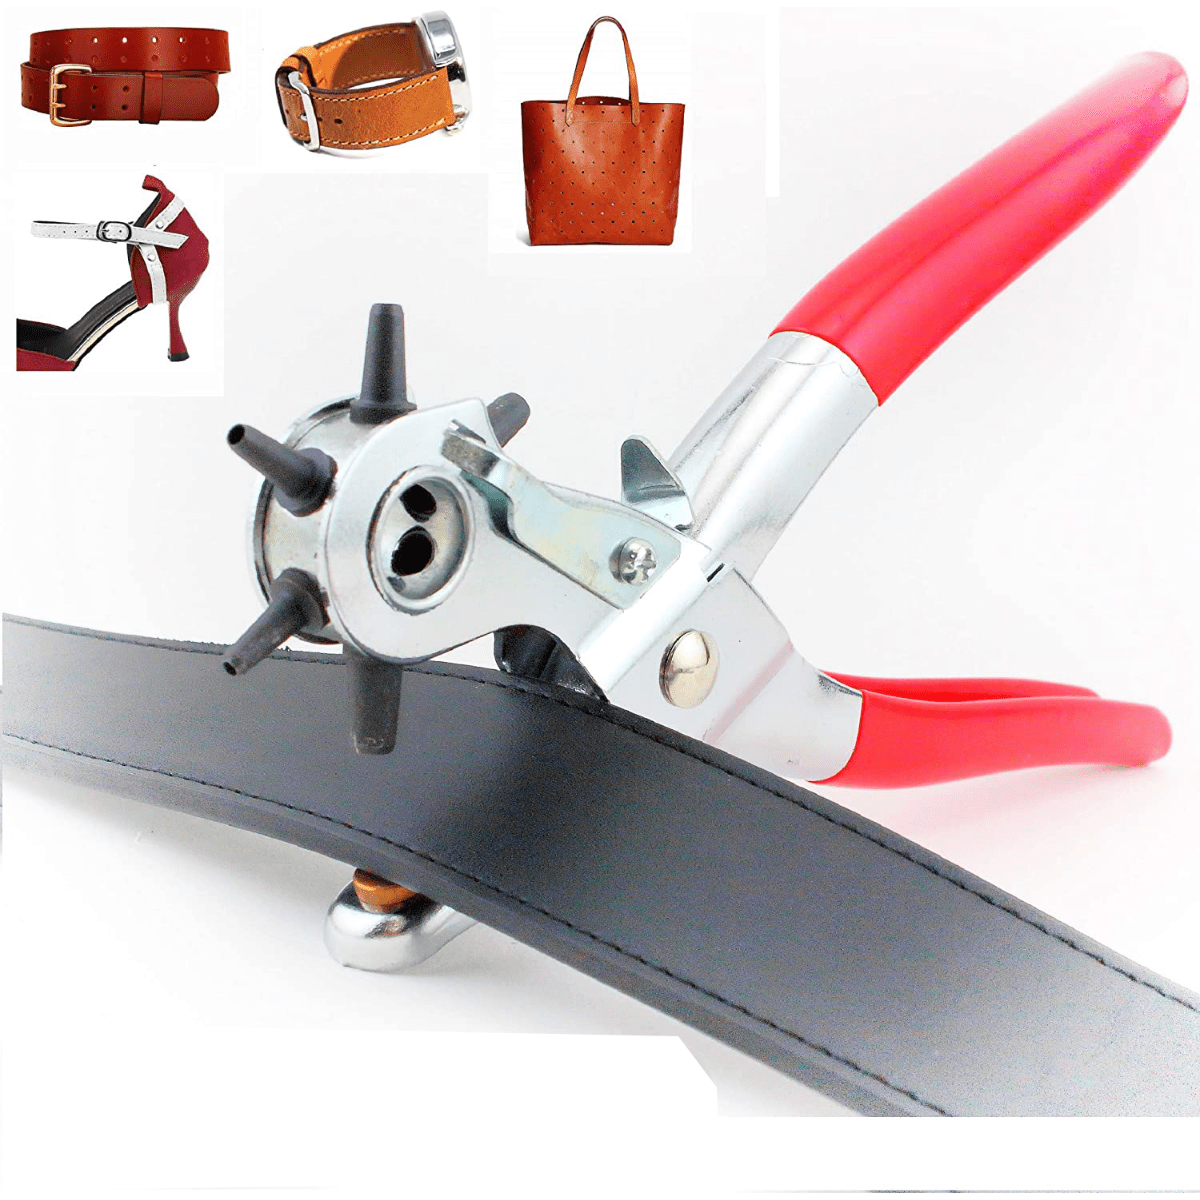 2 MM - 5 MM SIX HOLLOW BELL PUNCHES REVOLVING PUNCHER LEATHER BELT PUNCH  PLIER